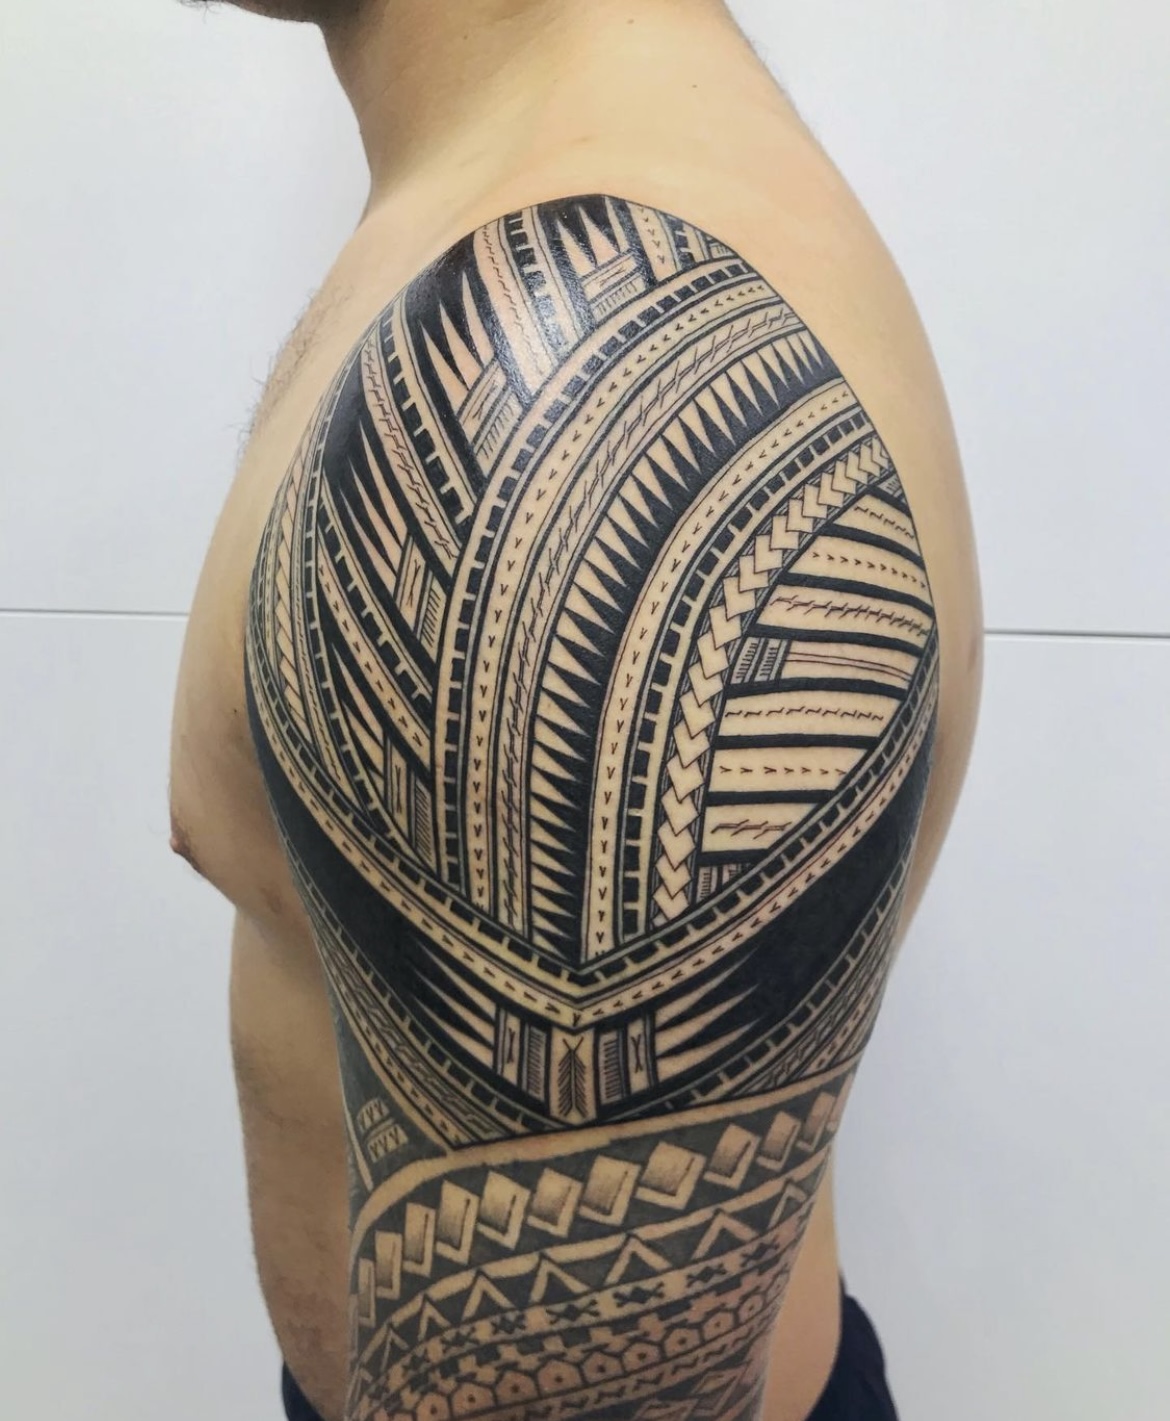 Image showcasing traditional Polynesian tattoo motifs, including intricate patterns and symbolic designs.